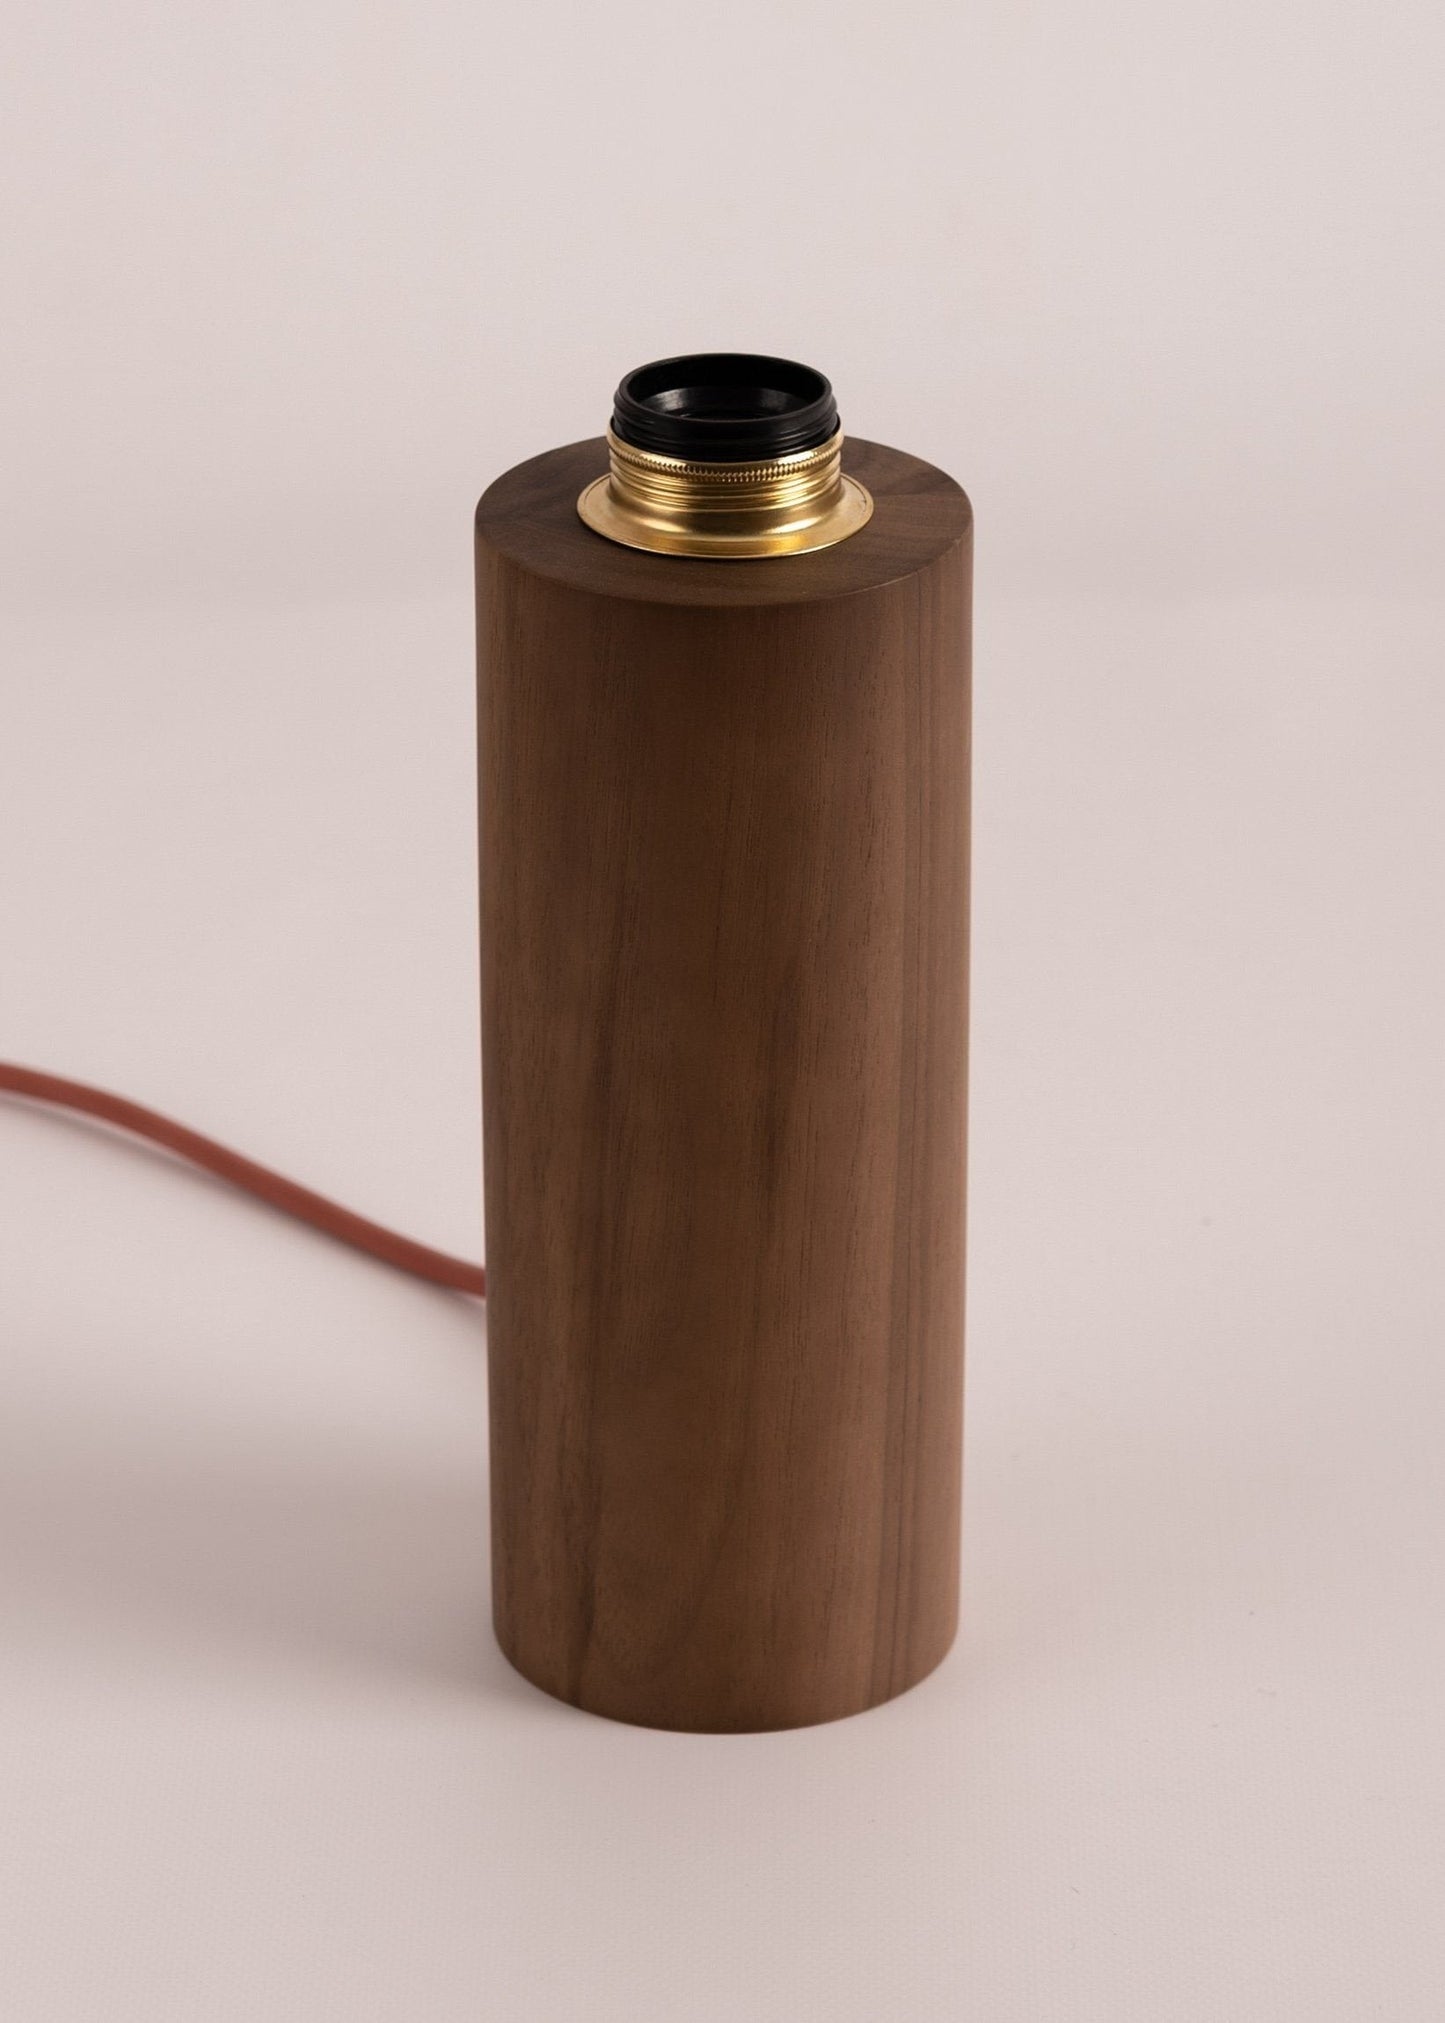 Pipito Table Lamp - Walnut Wood Table & Task Lamps